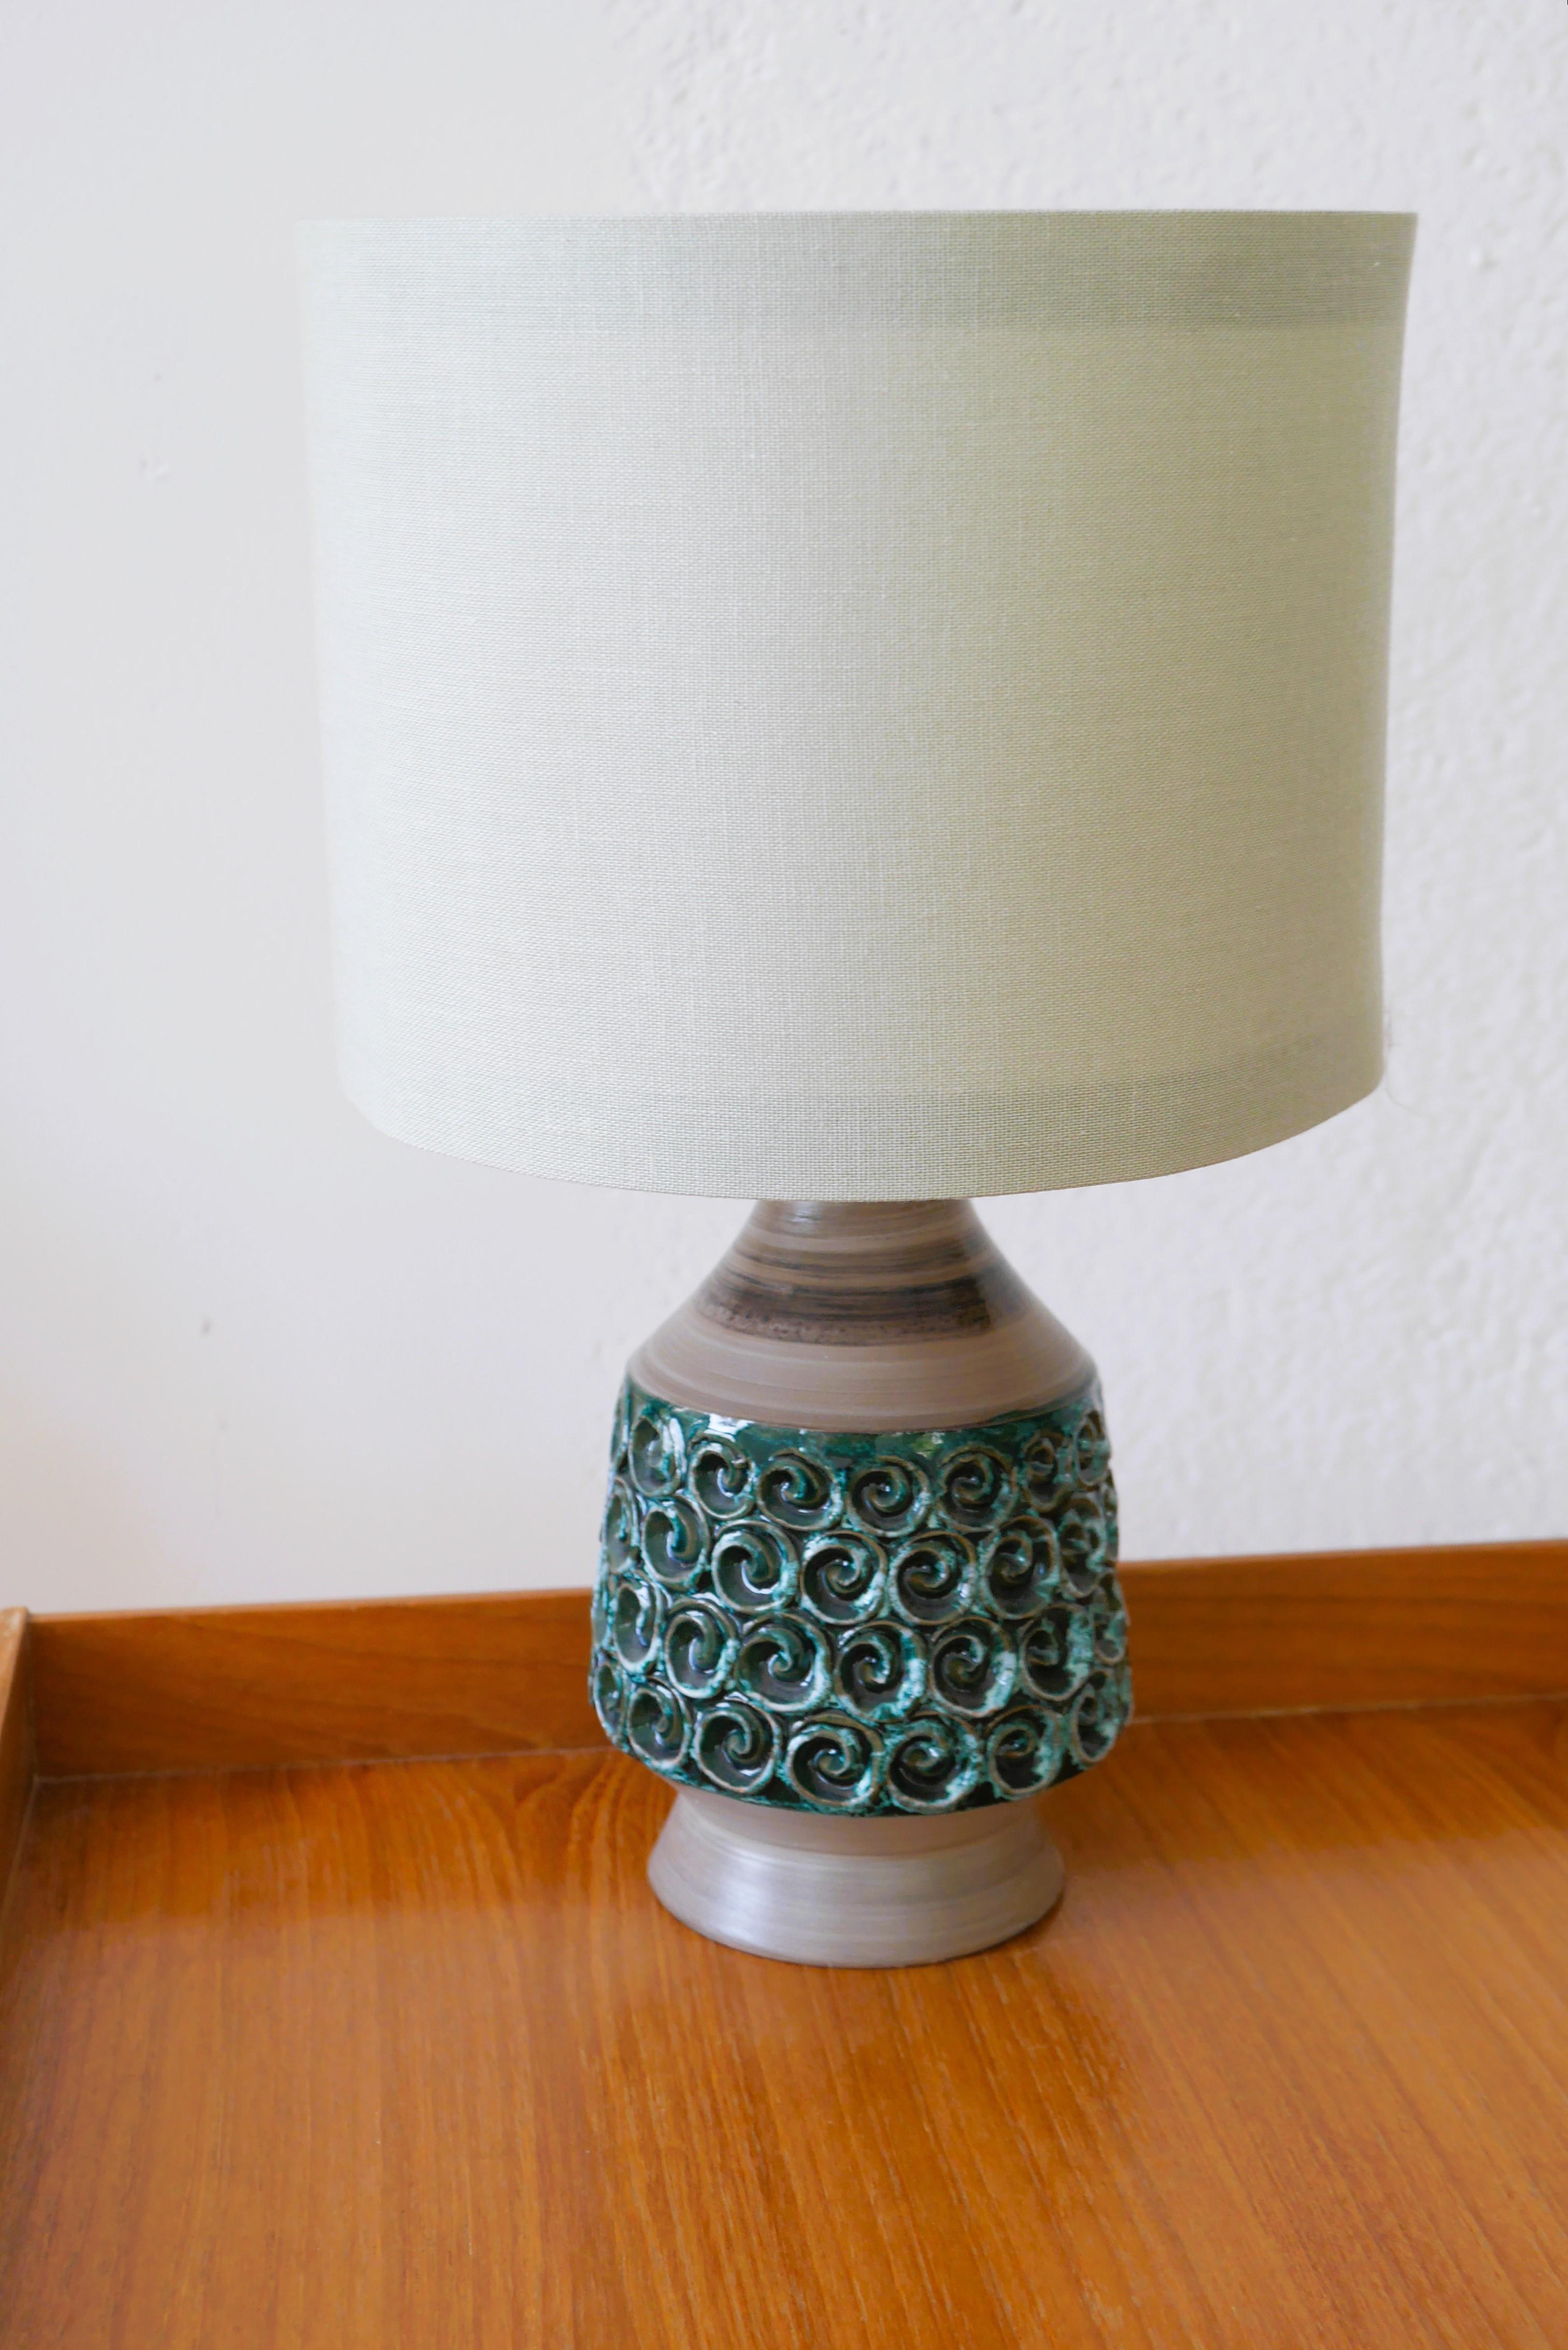 A beautiful handmade ceramic lamp base from Bitossi, Italy. This is very adorable little lamp which has very muted colours, with a warm pale brown base with green details in the middle section, which gives it a contemporary feeling. It is 24cm